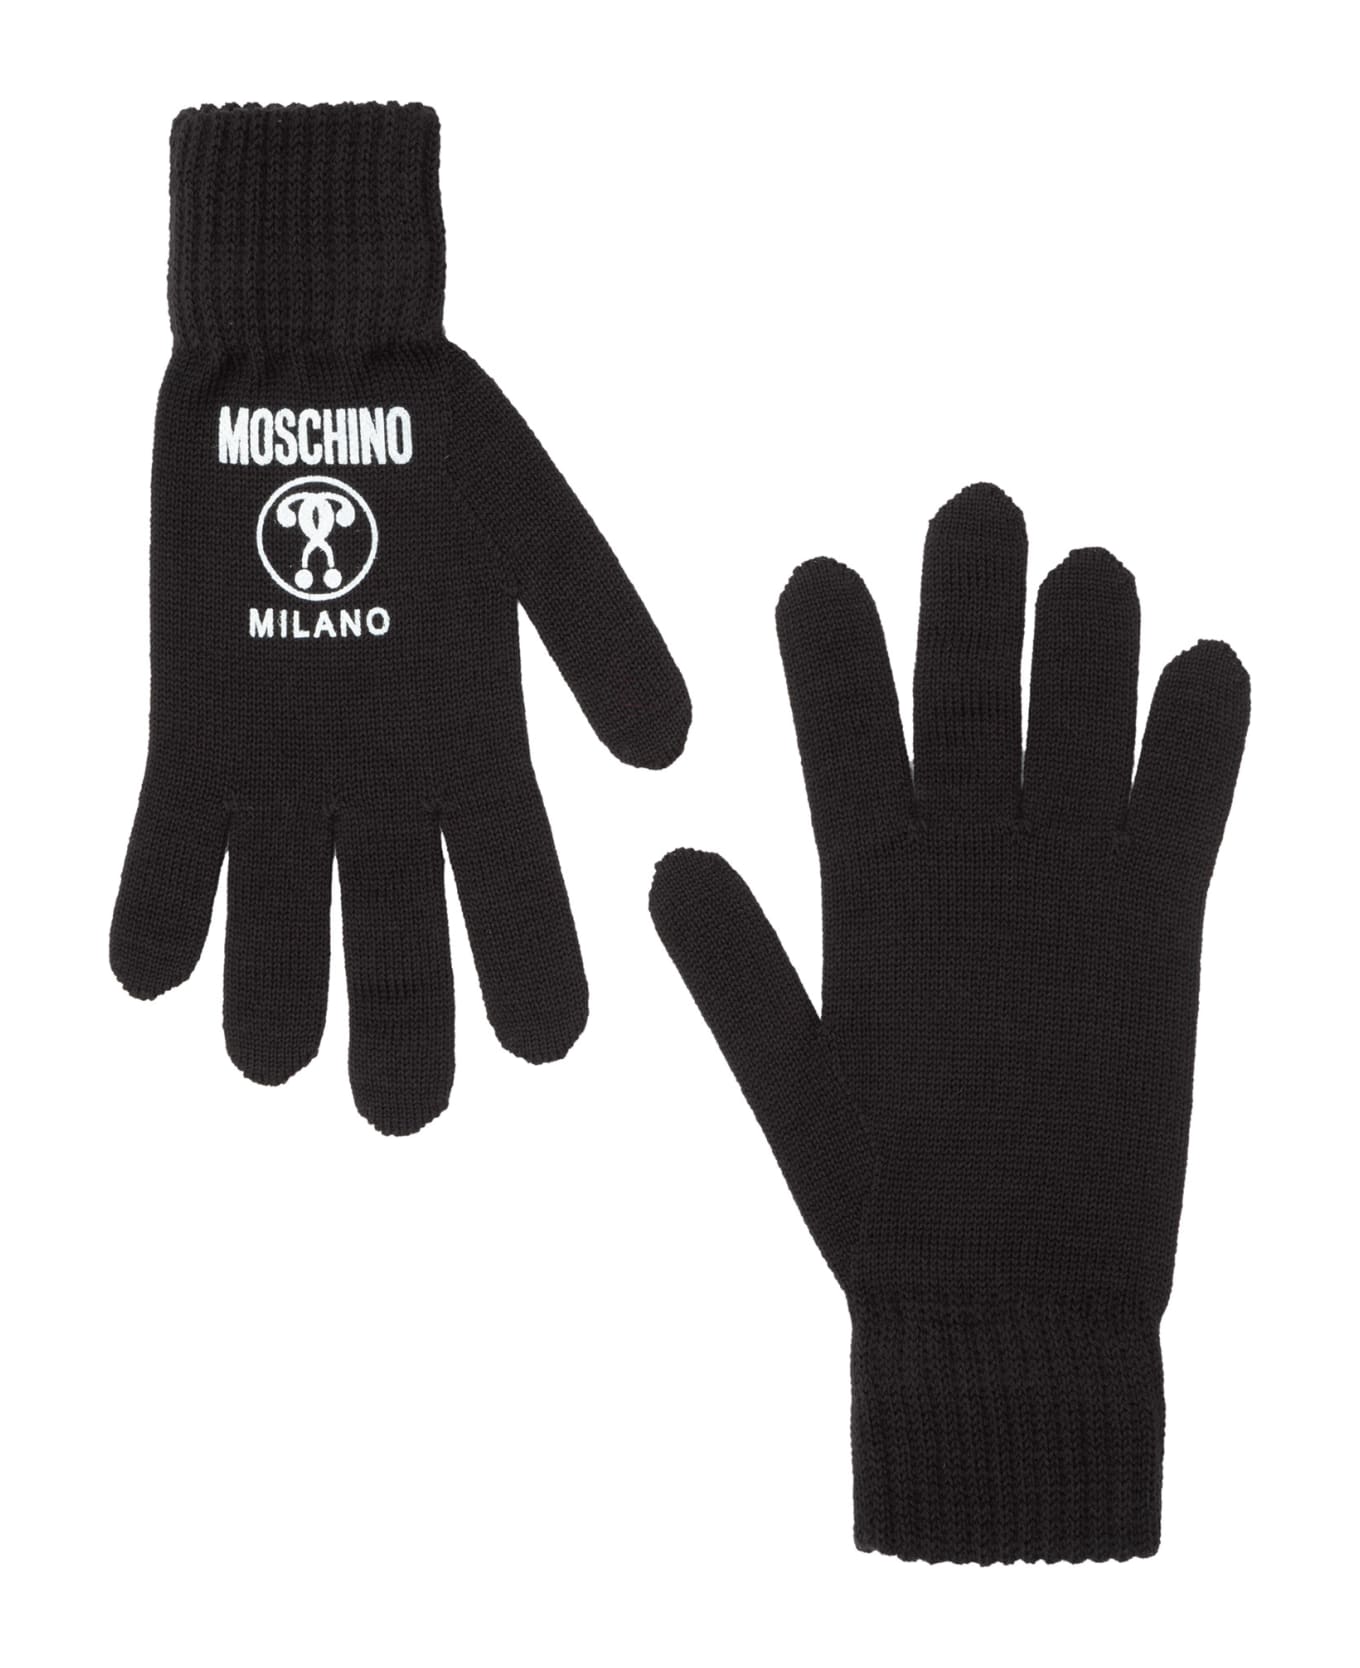 Moschino Double Question Mark Wool Gloves - Black